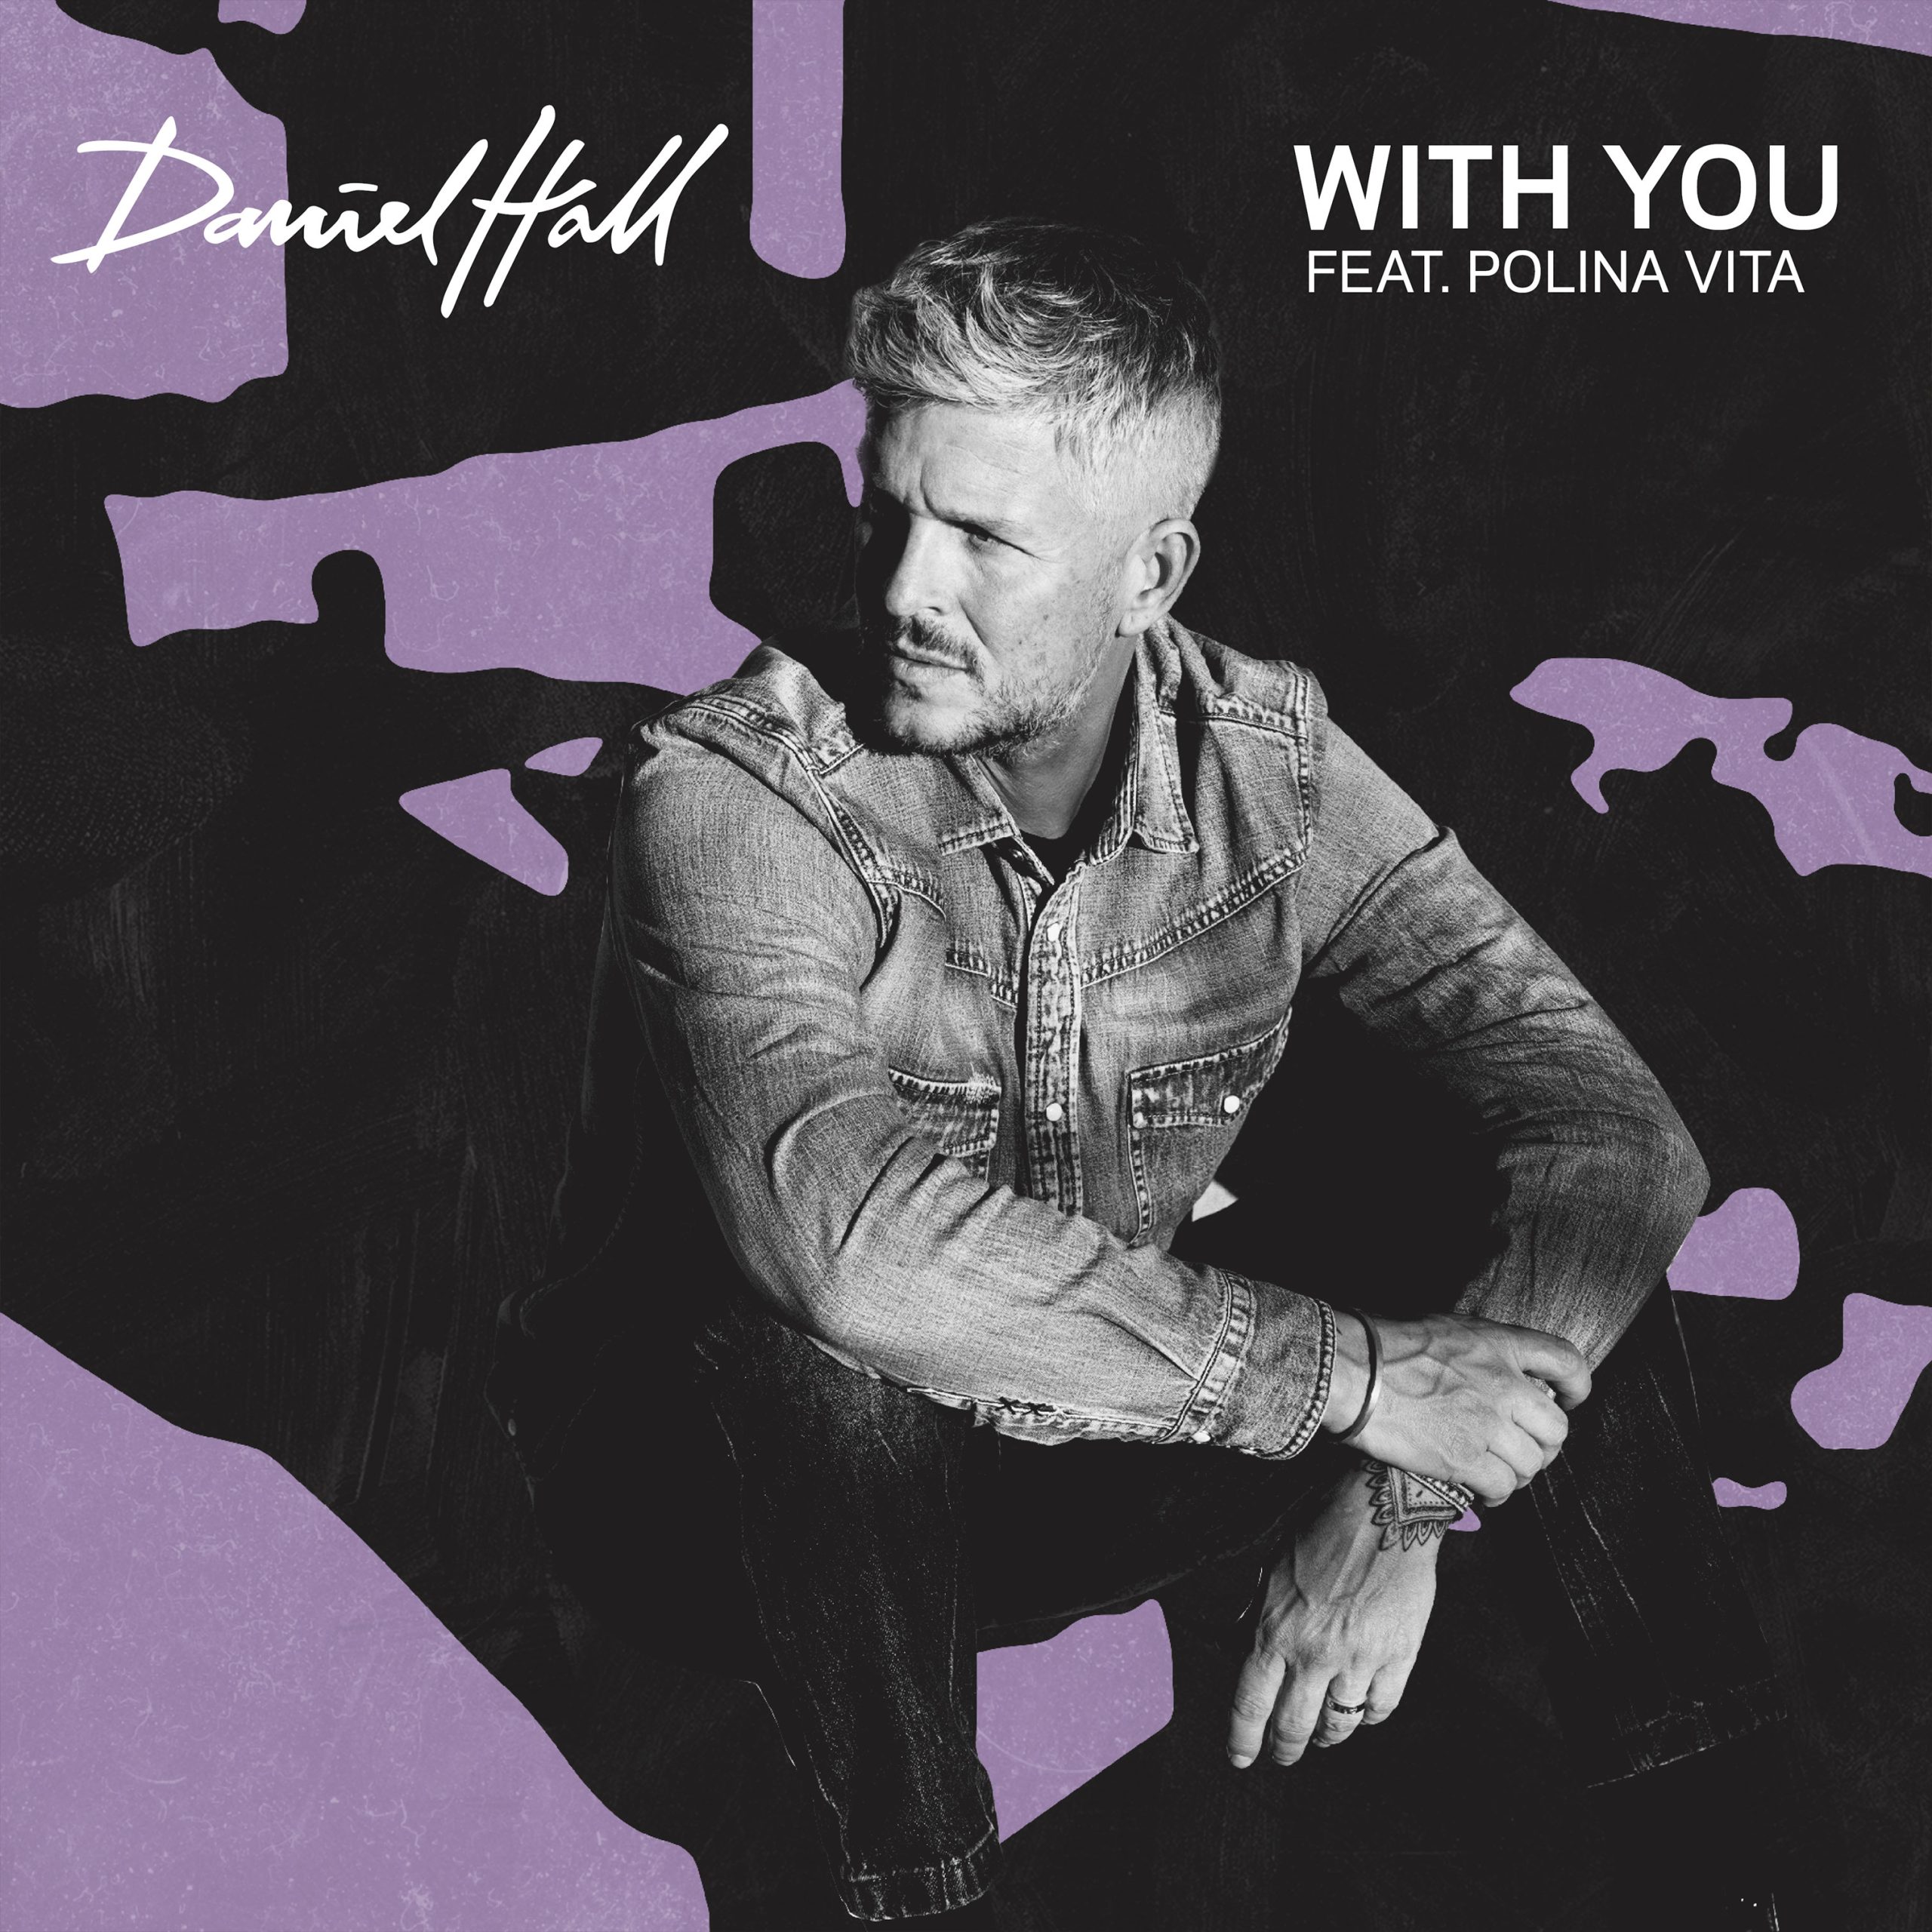 Daniel Hall - With you